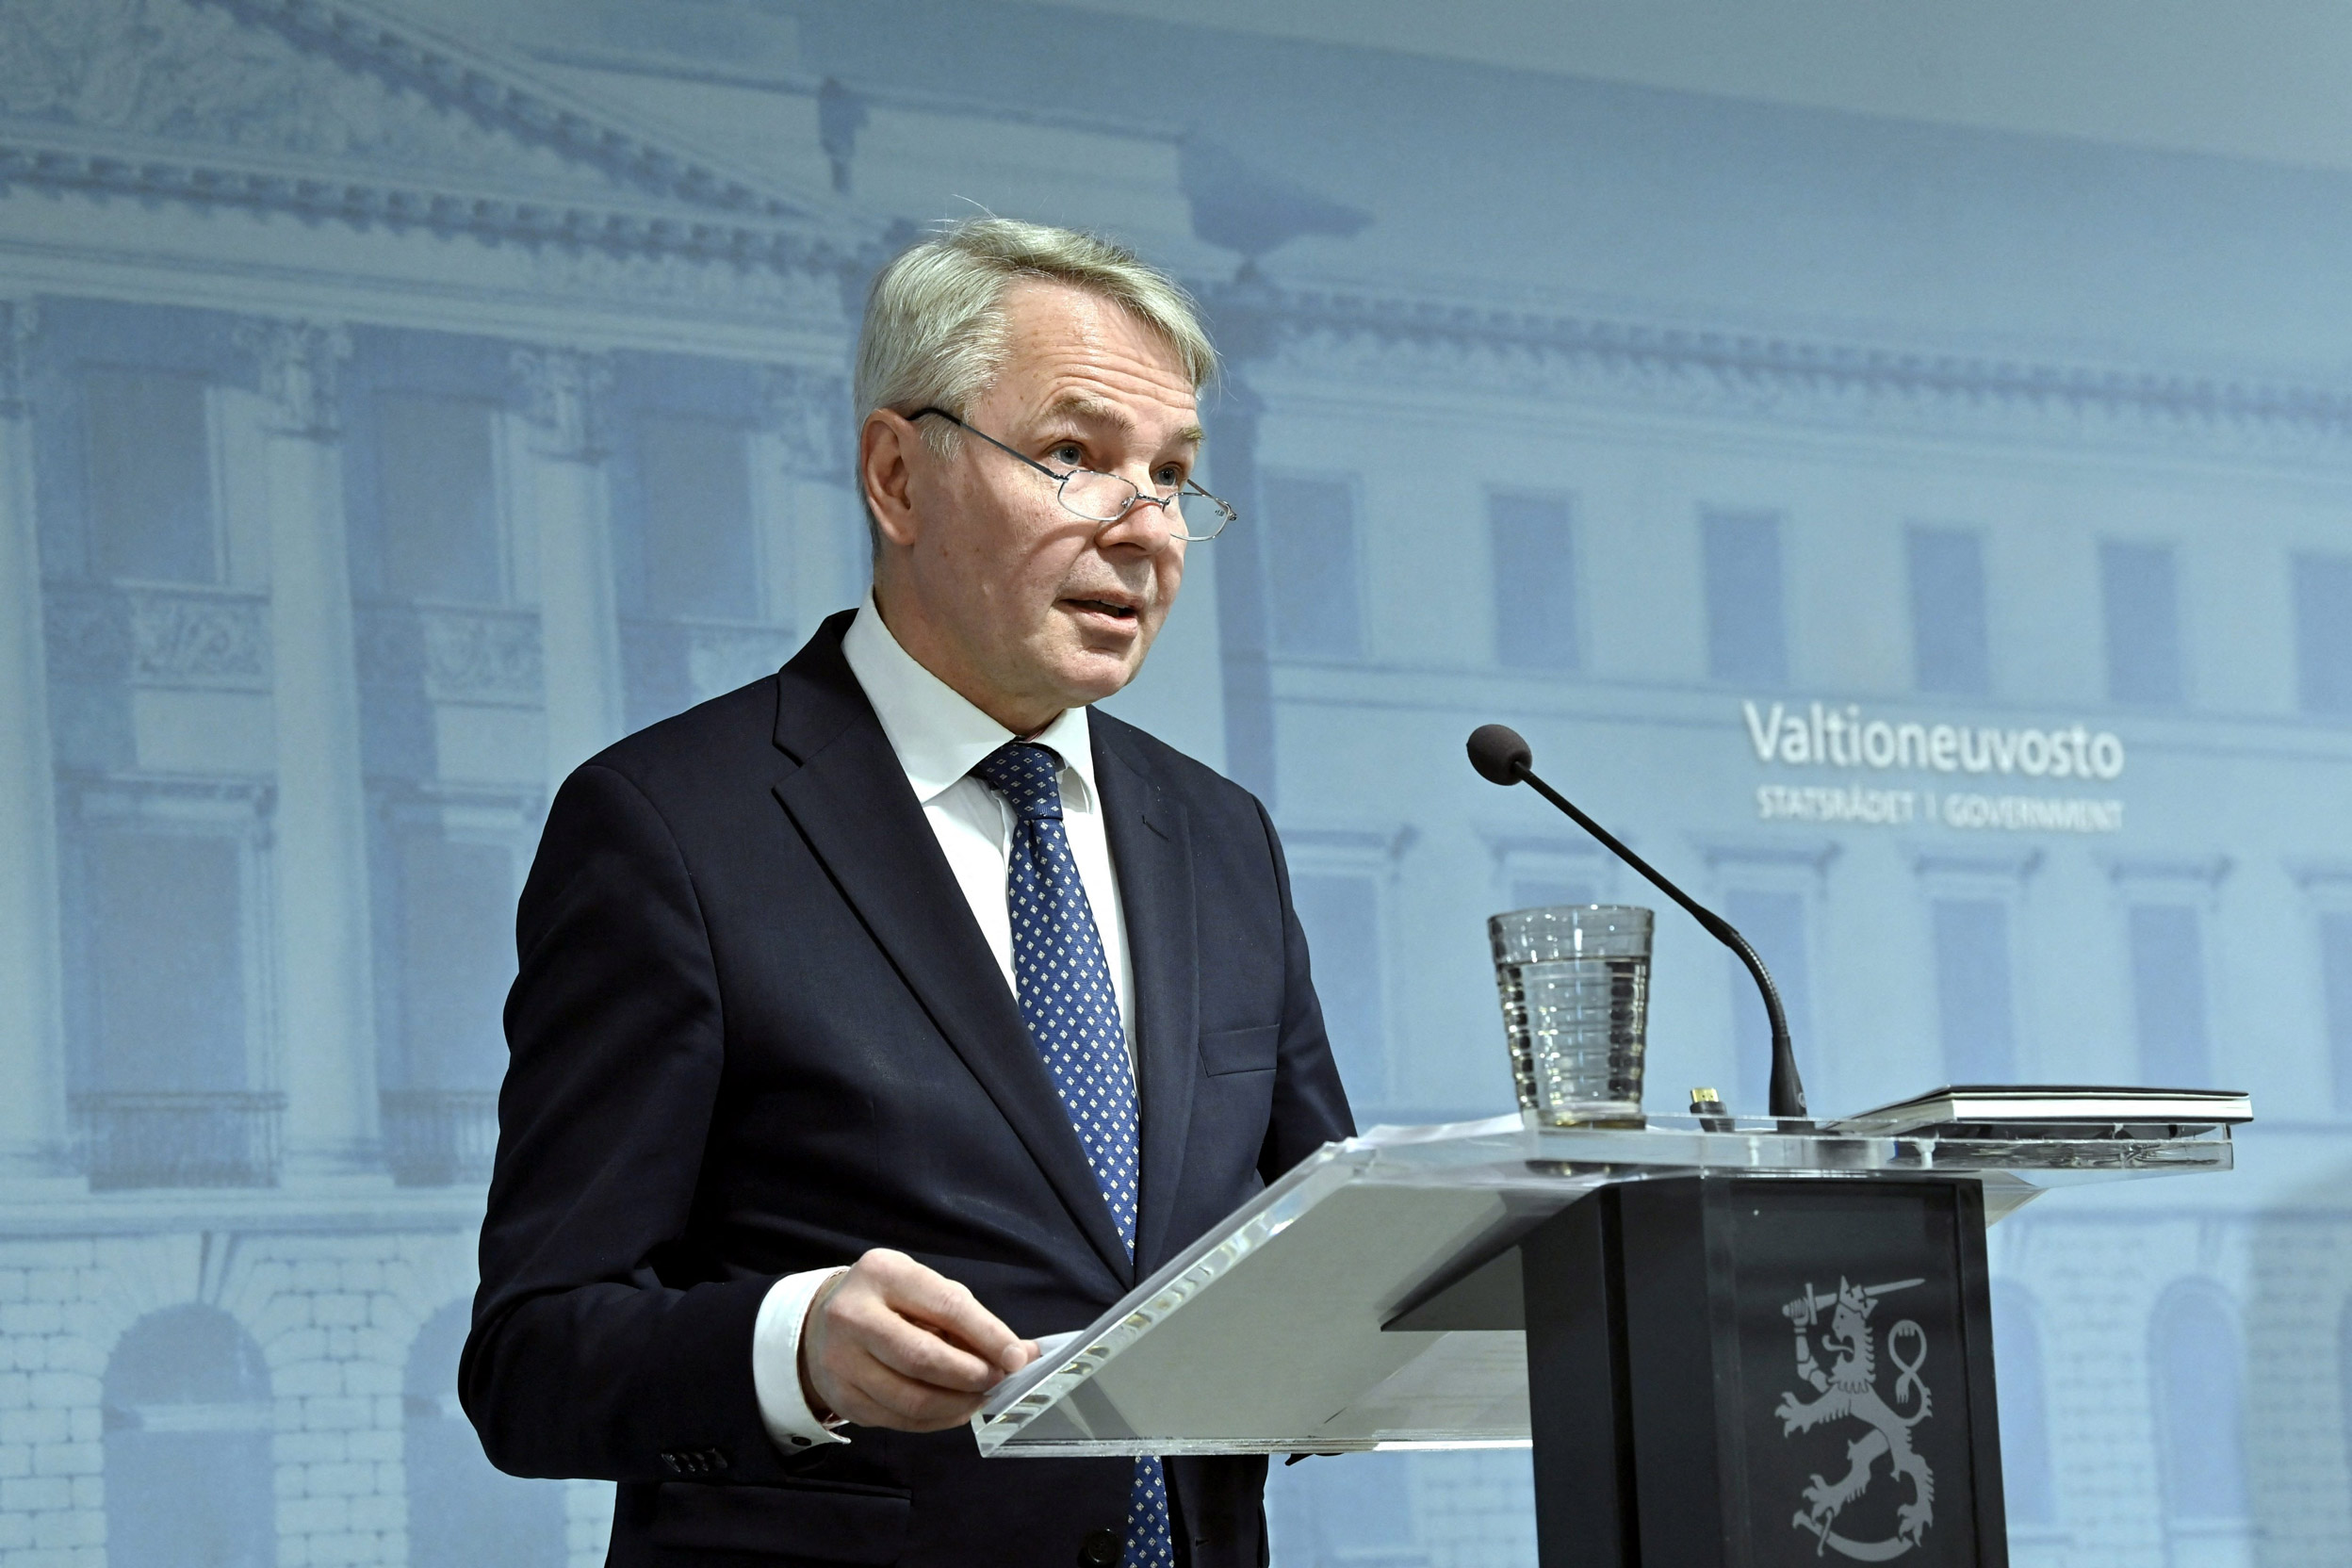 Finland's Foreign Minister Pekka Haavisto  present the report on changes in the foreign and security policy of Finland, in Helsinki on Wednesday.